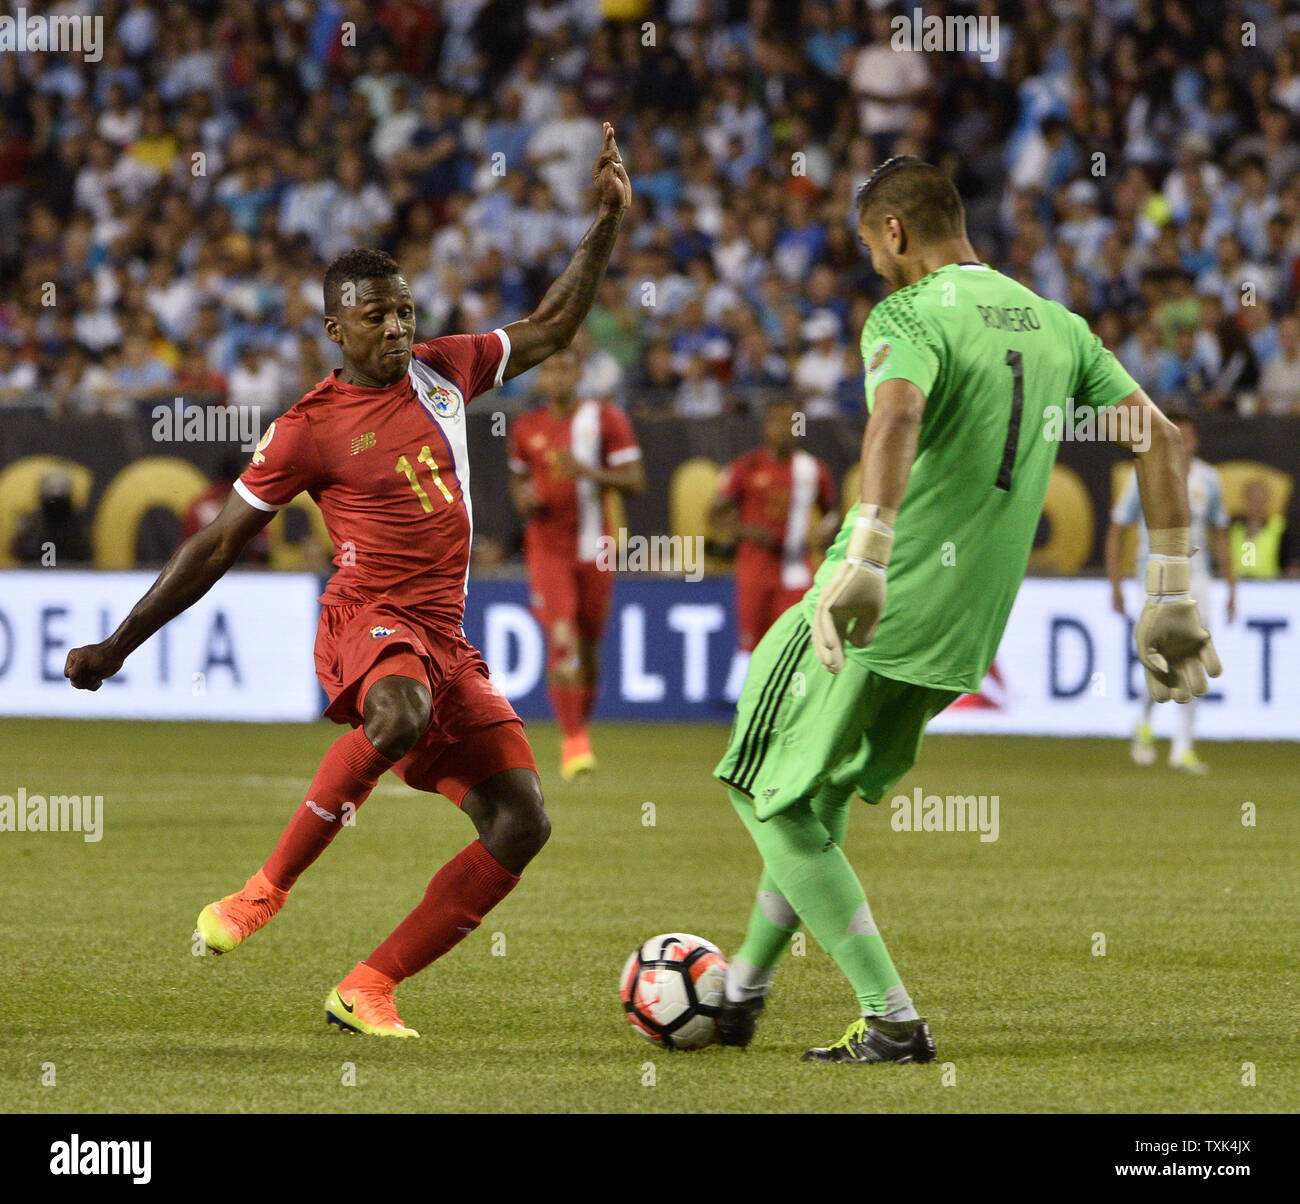 Argentina goalkeeper Sergio Romero (R) beats Panama midfielder Armando Cooper to the ball during the first half of a 2016 Copa America Centenario Group D match at Soldier Field in Chicago on June 10, 2016. Argentina defeated Panama 5-0.     Photo by Brian Kersey/UPI Stock Photo